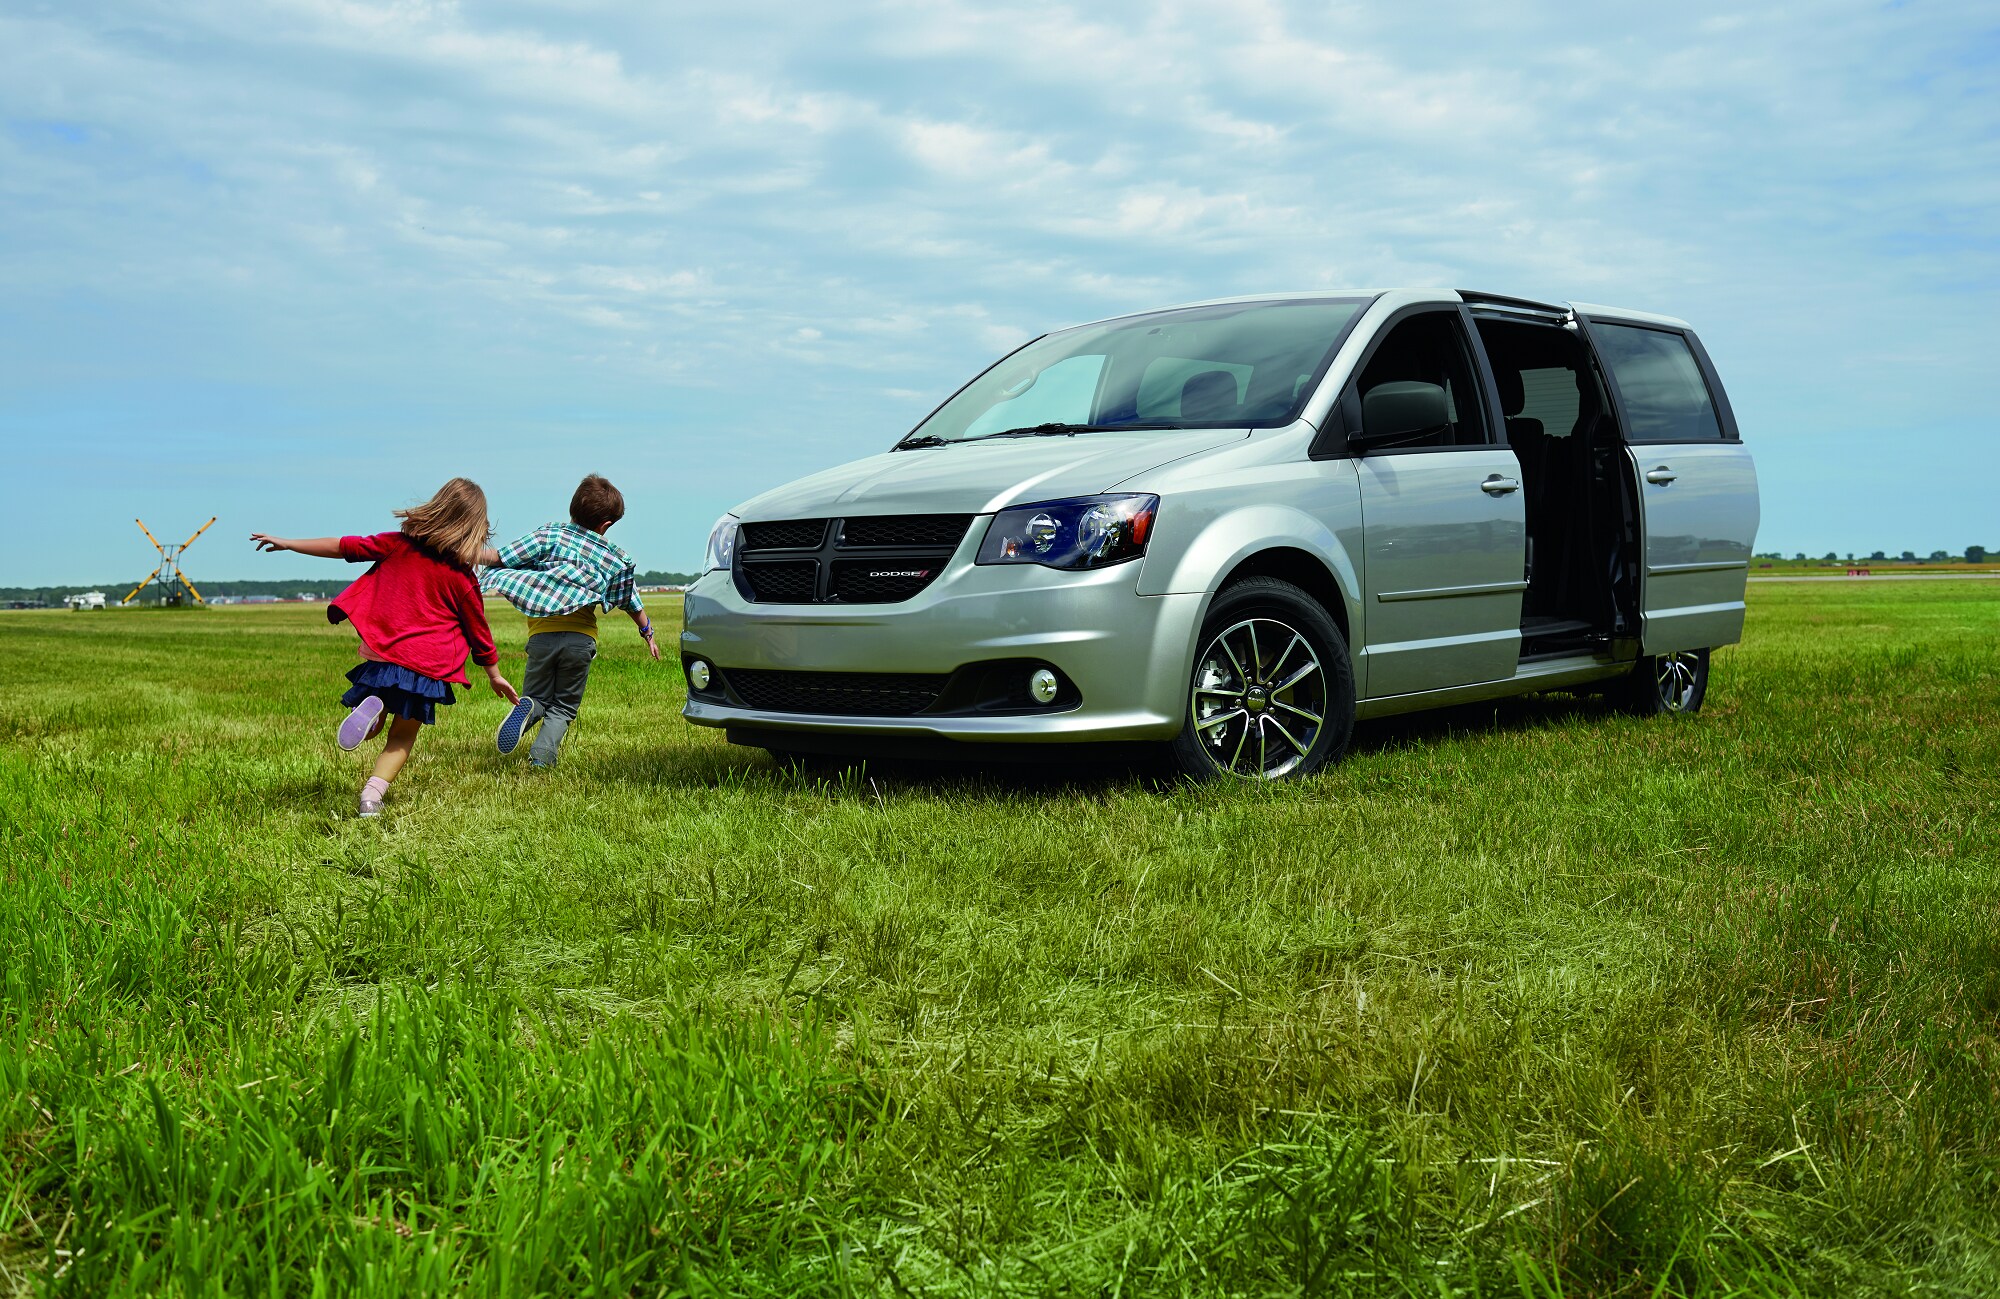 silver Dodge Grand Caravan Van parked on a grassy hill with kids playing nearby